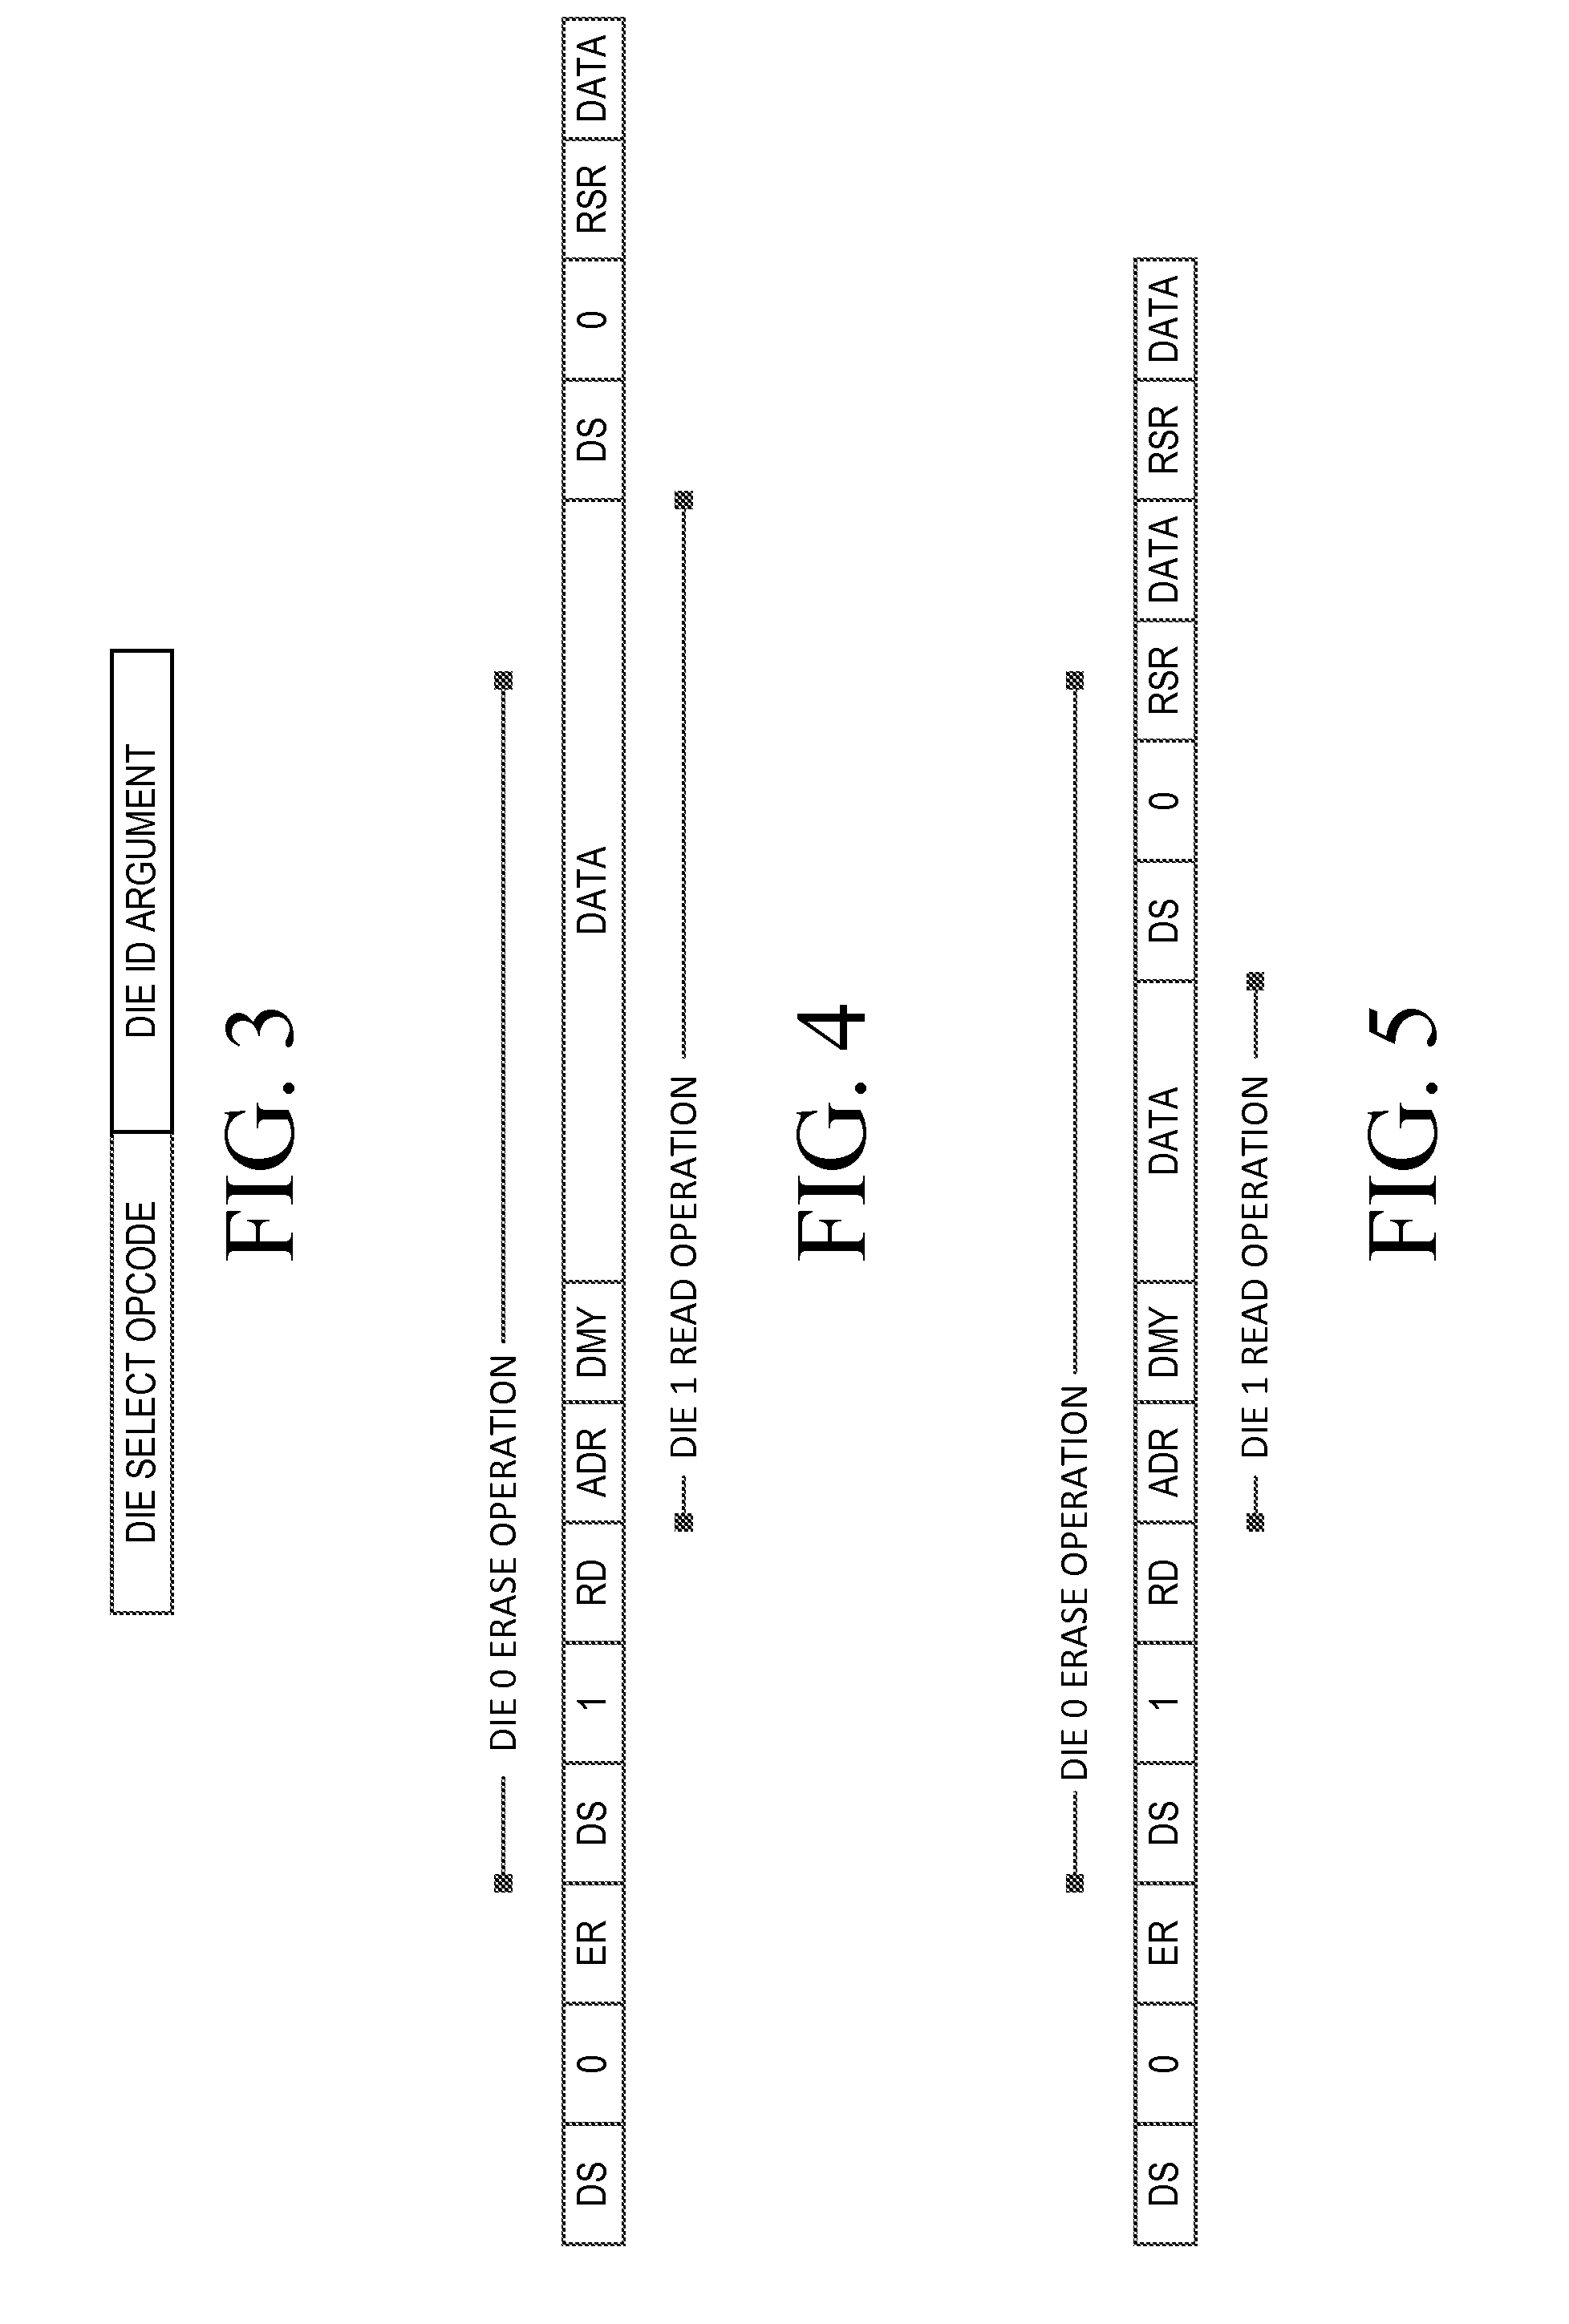 Stacked Die Flash Memory Device With Serial Peripheral Interface